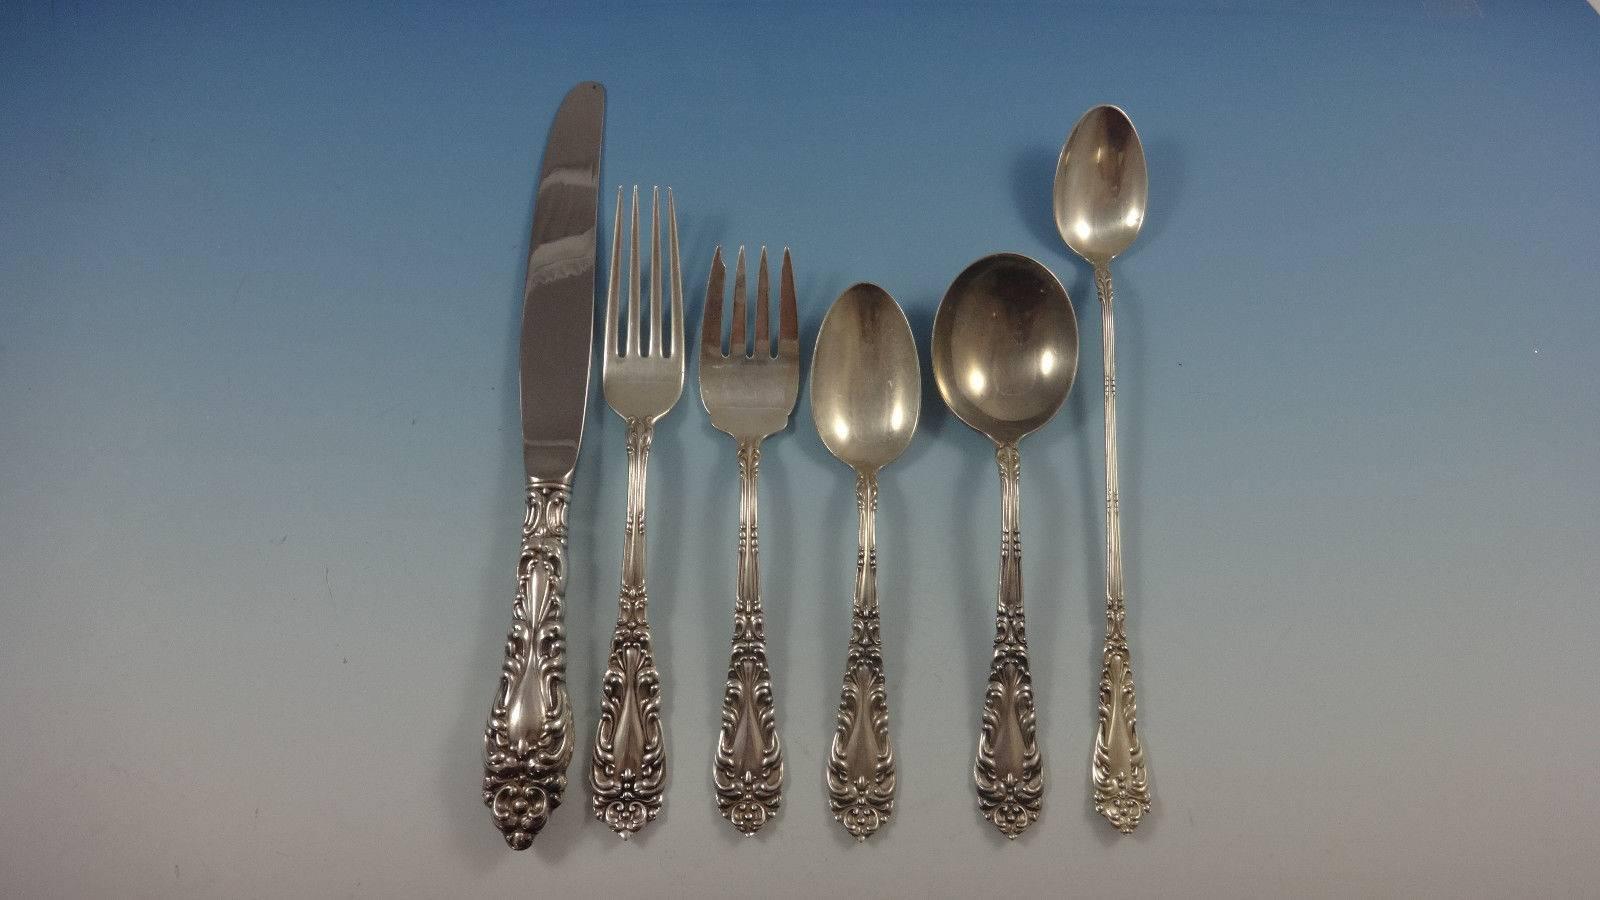 Athene aka Crescendo by Amston sterling silver Flatware set - 51 Pieces. This set includes:

Eight knives, 9